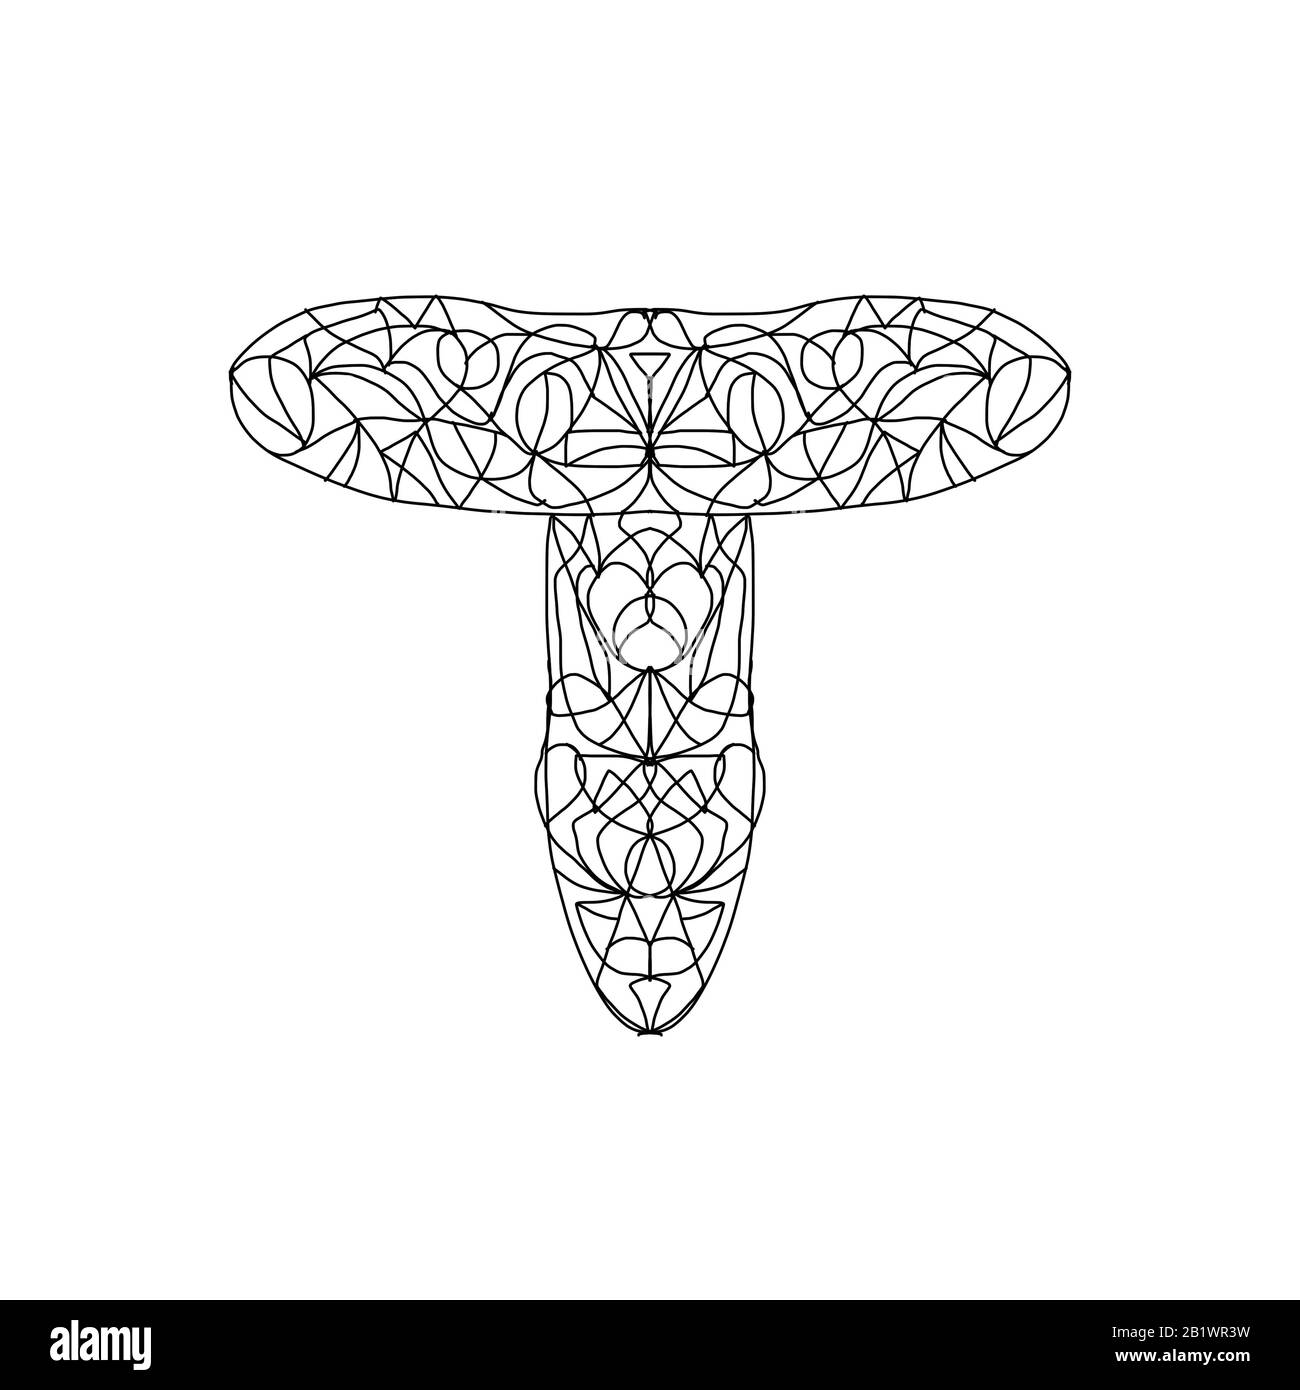 Mushroom coloring book with symmetric abstract pattern. coloring book Stock Photo